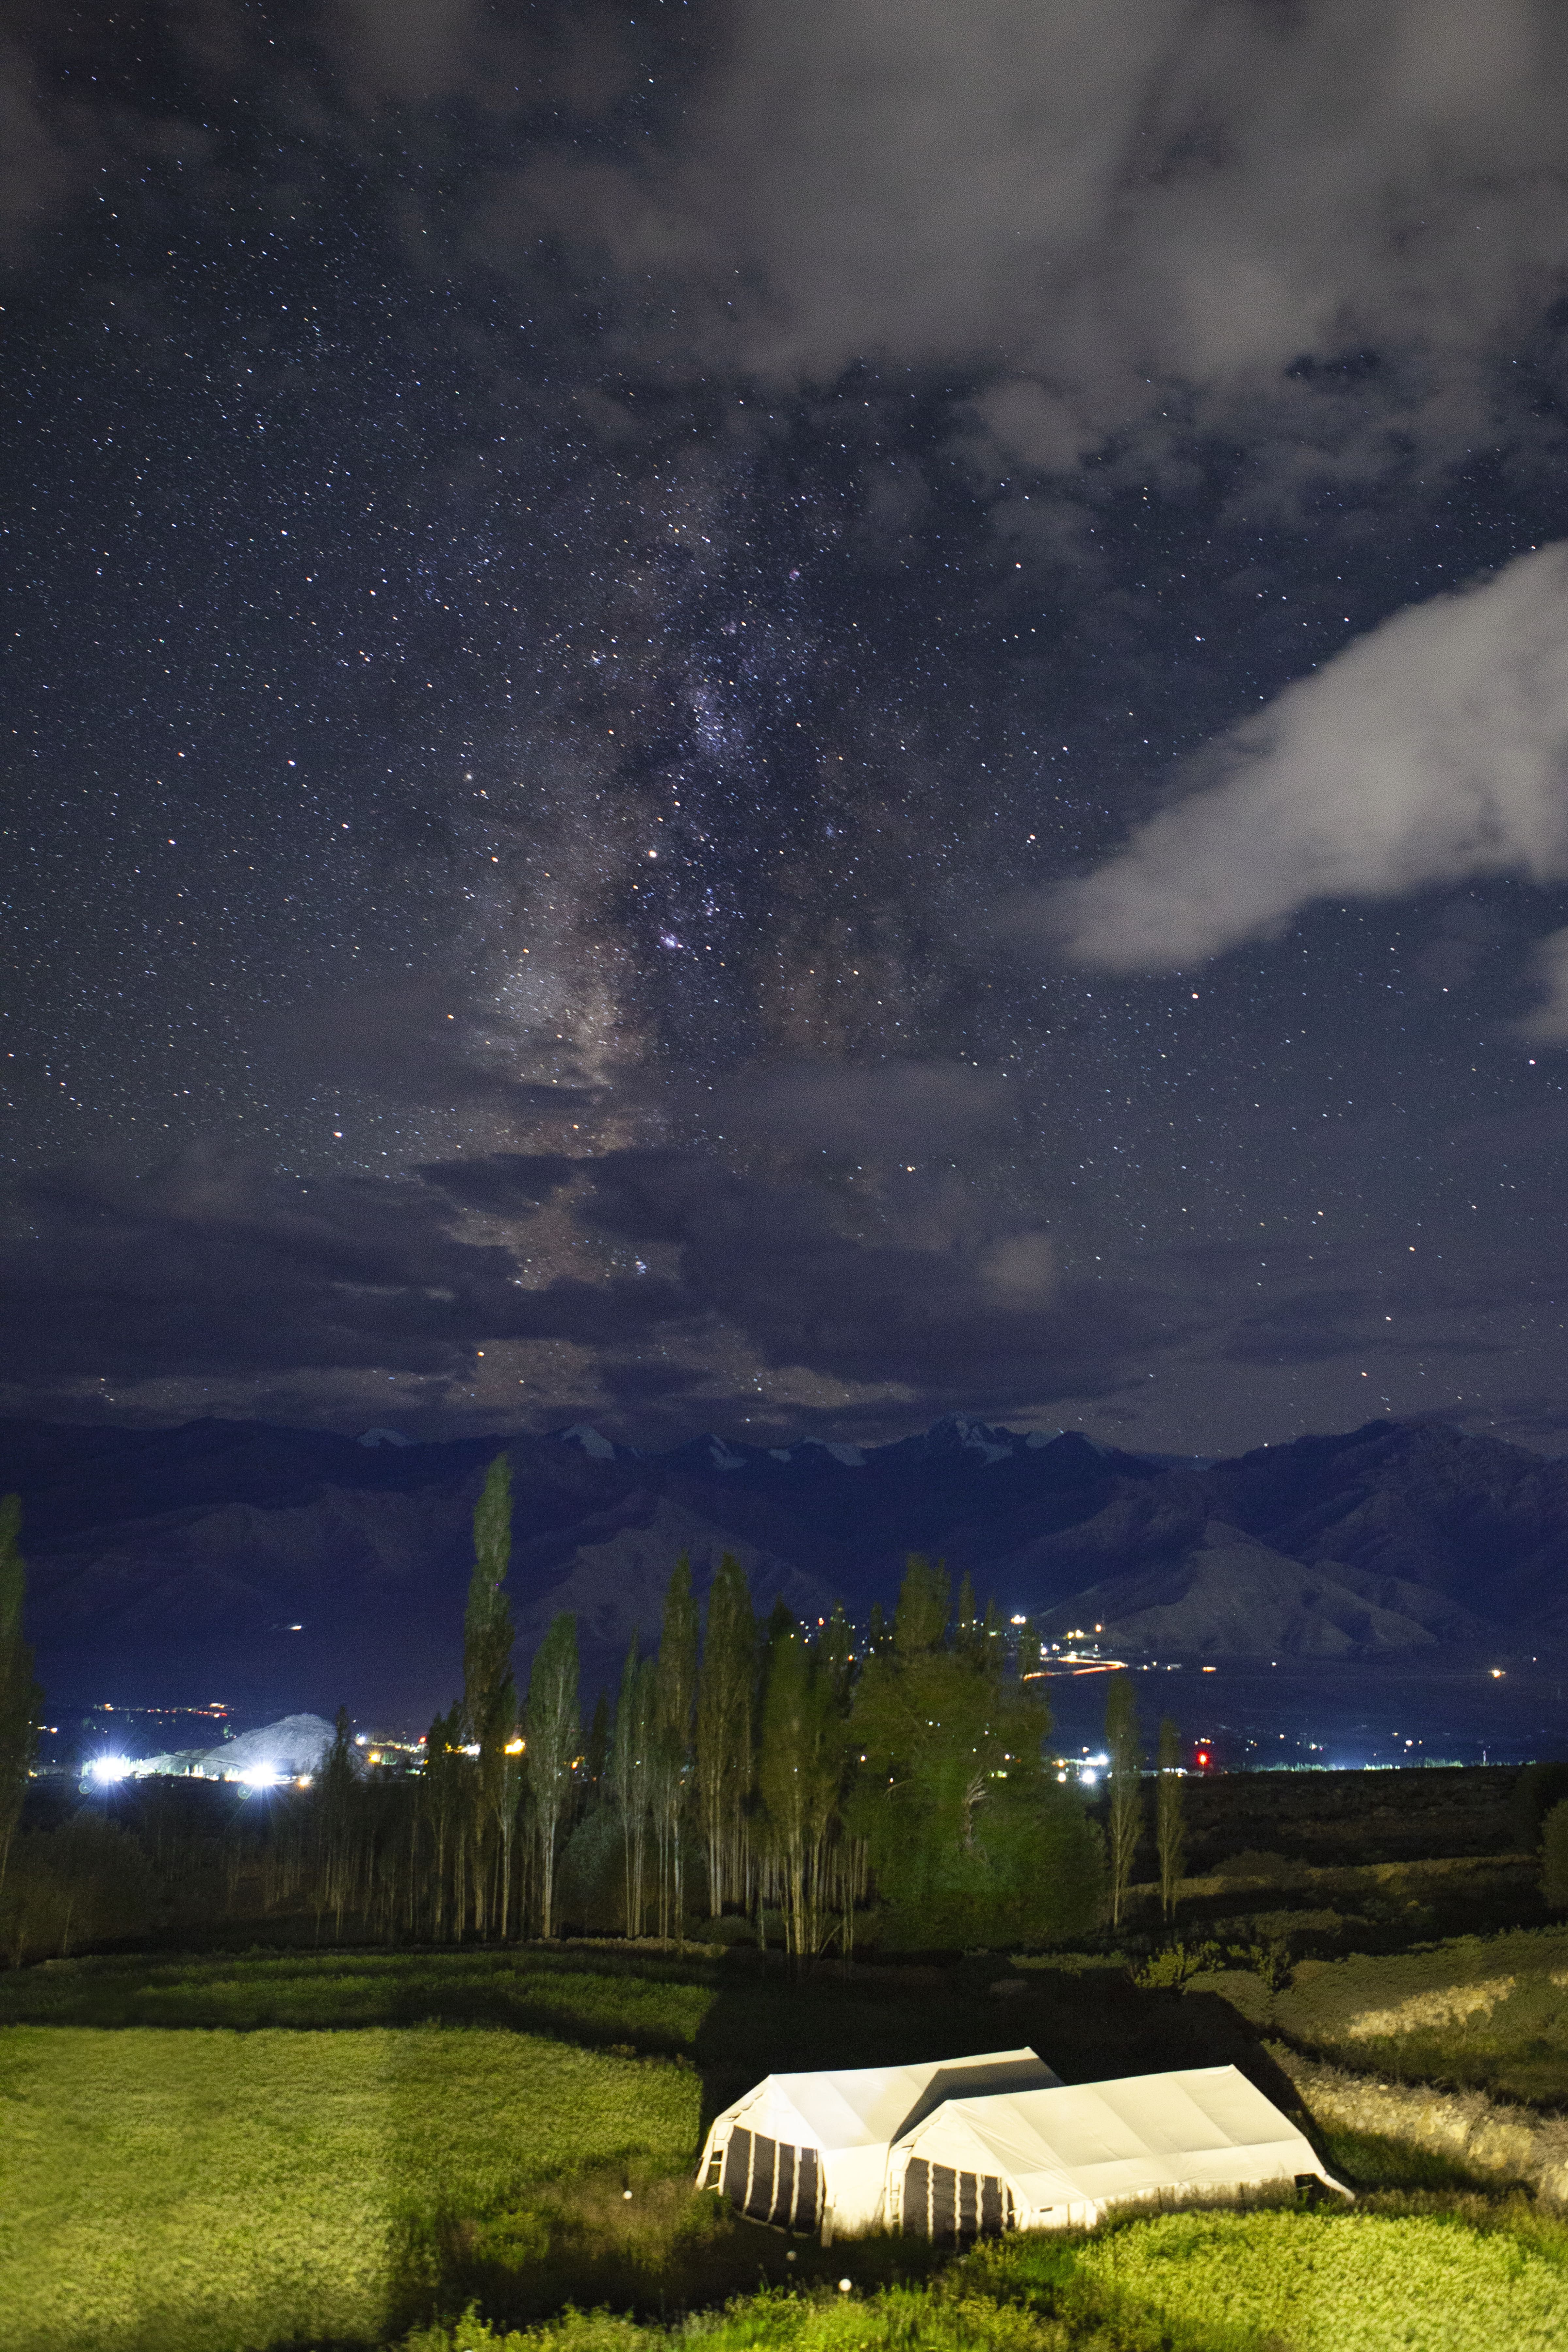 Captured during Astrophotography trip to Ladakh 2018.